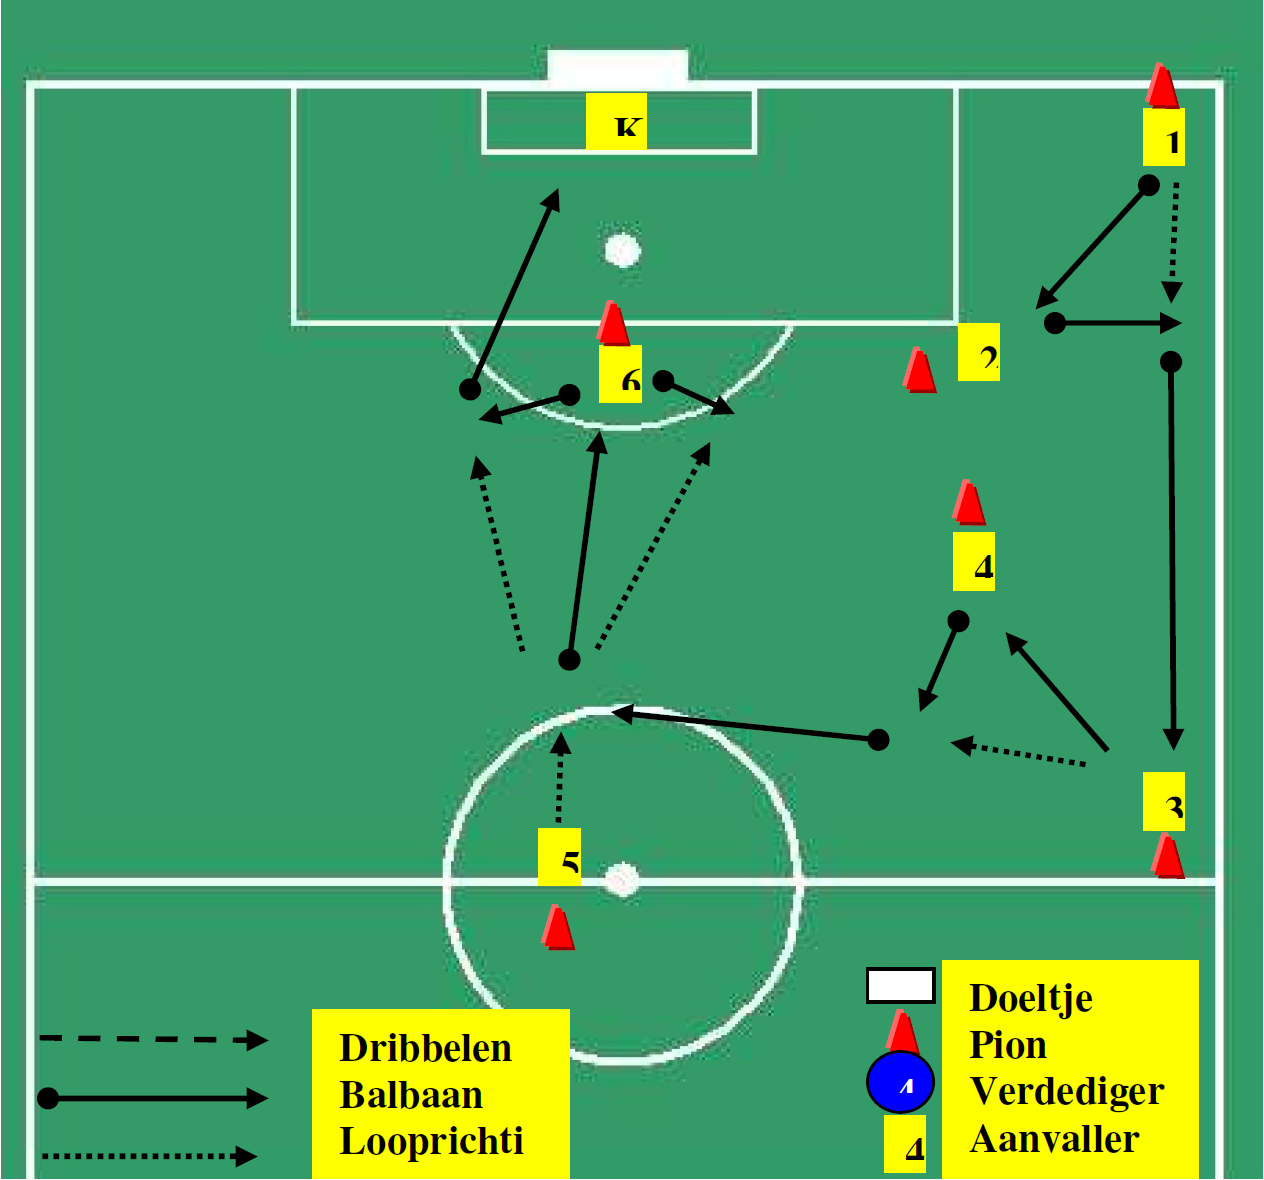 improve-passing-kicking-shooting-in-combination-with-finishing-1